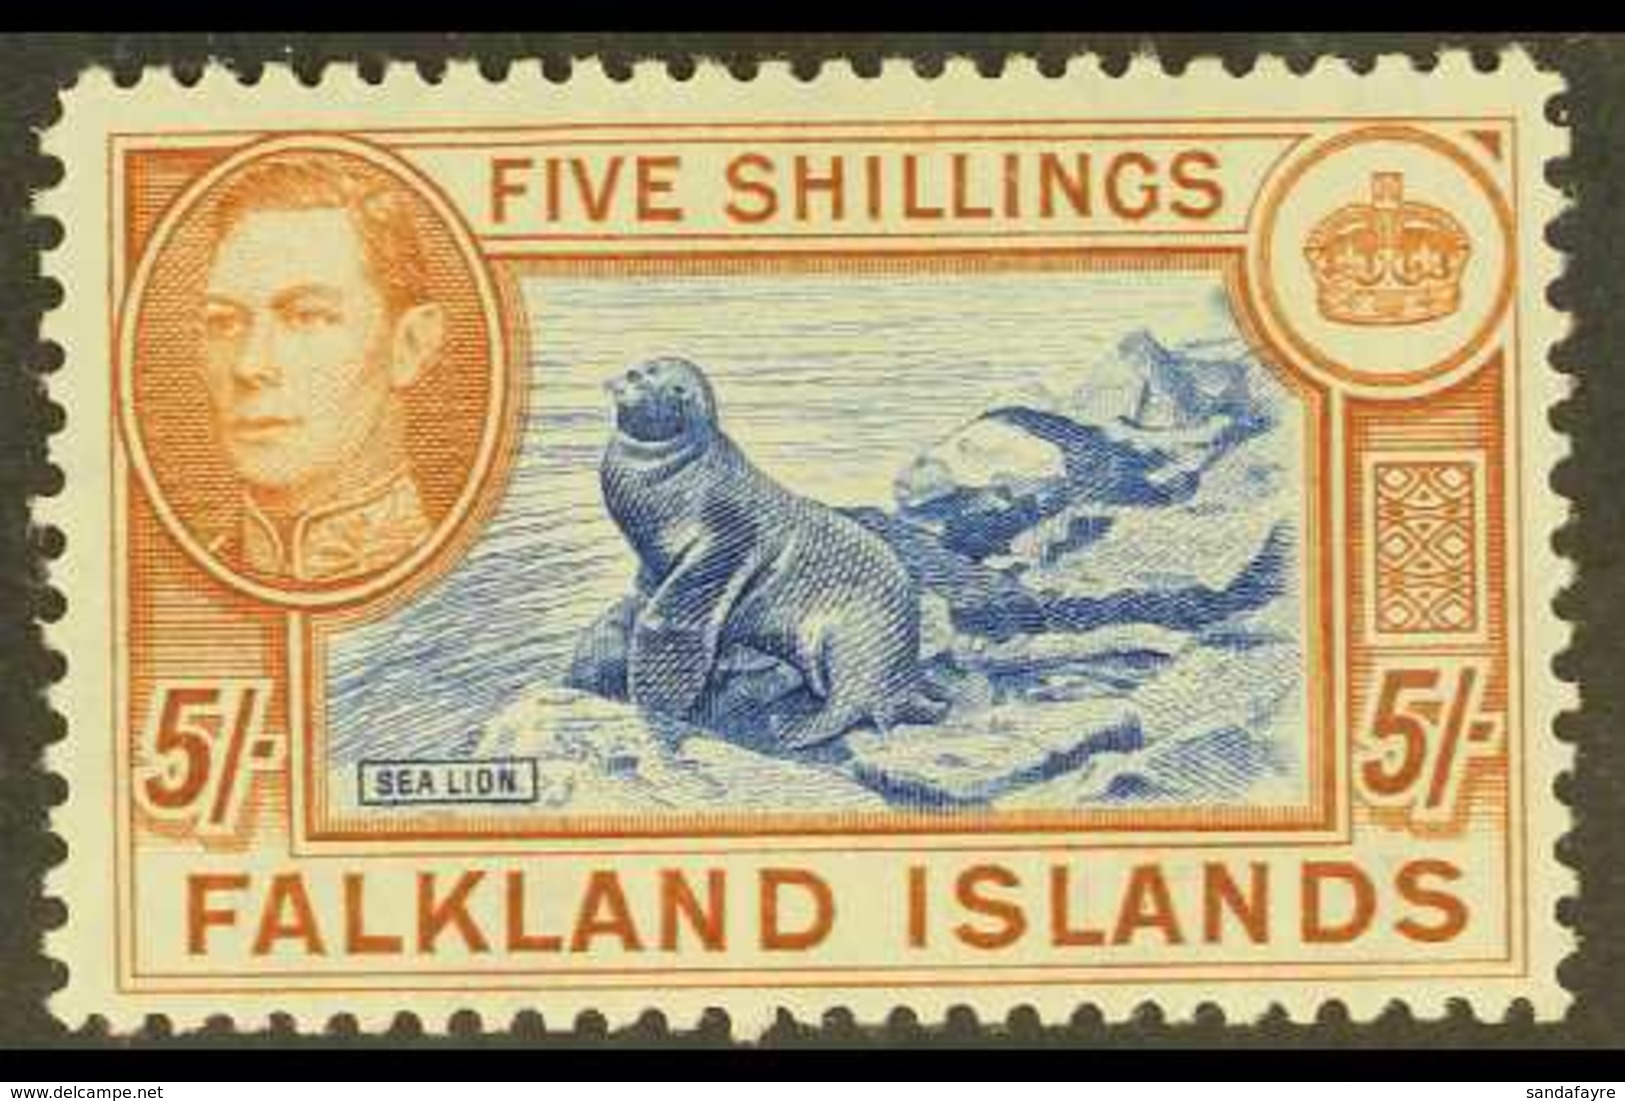 1938-50 KGVI Definitive 5s Steel Blue And Buff-brown (thin Paper), SG 161d, Never Hinged Mint. For More Images, Please V - Falklandinseln